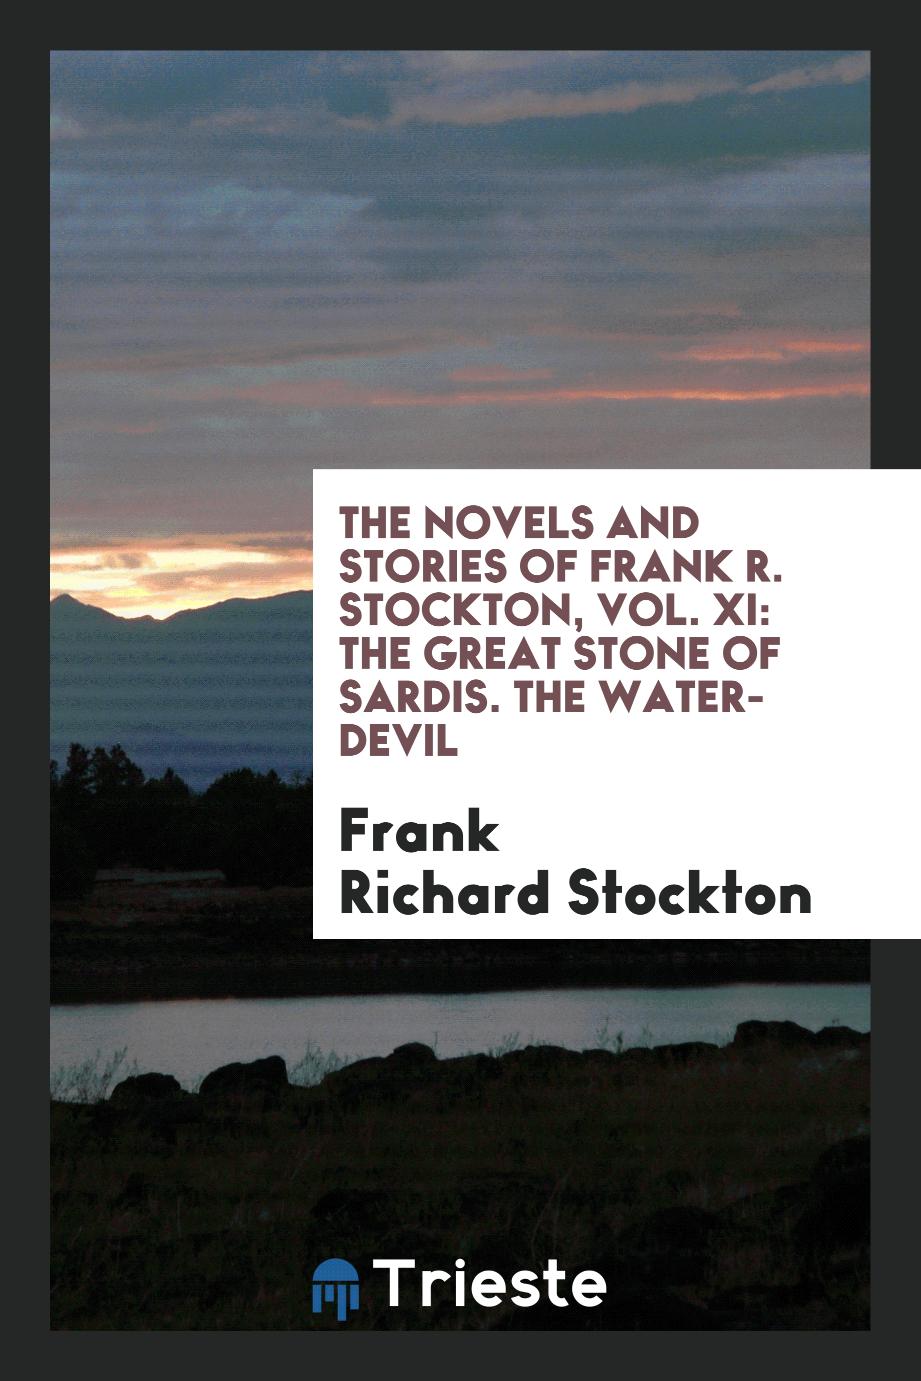 The novels and stories of Frank R. Stockton, Vol. XI: The great stone of sardis. The water-devil